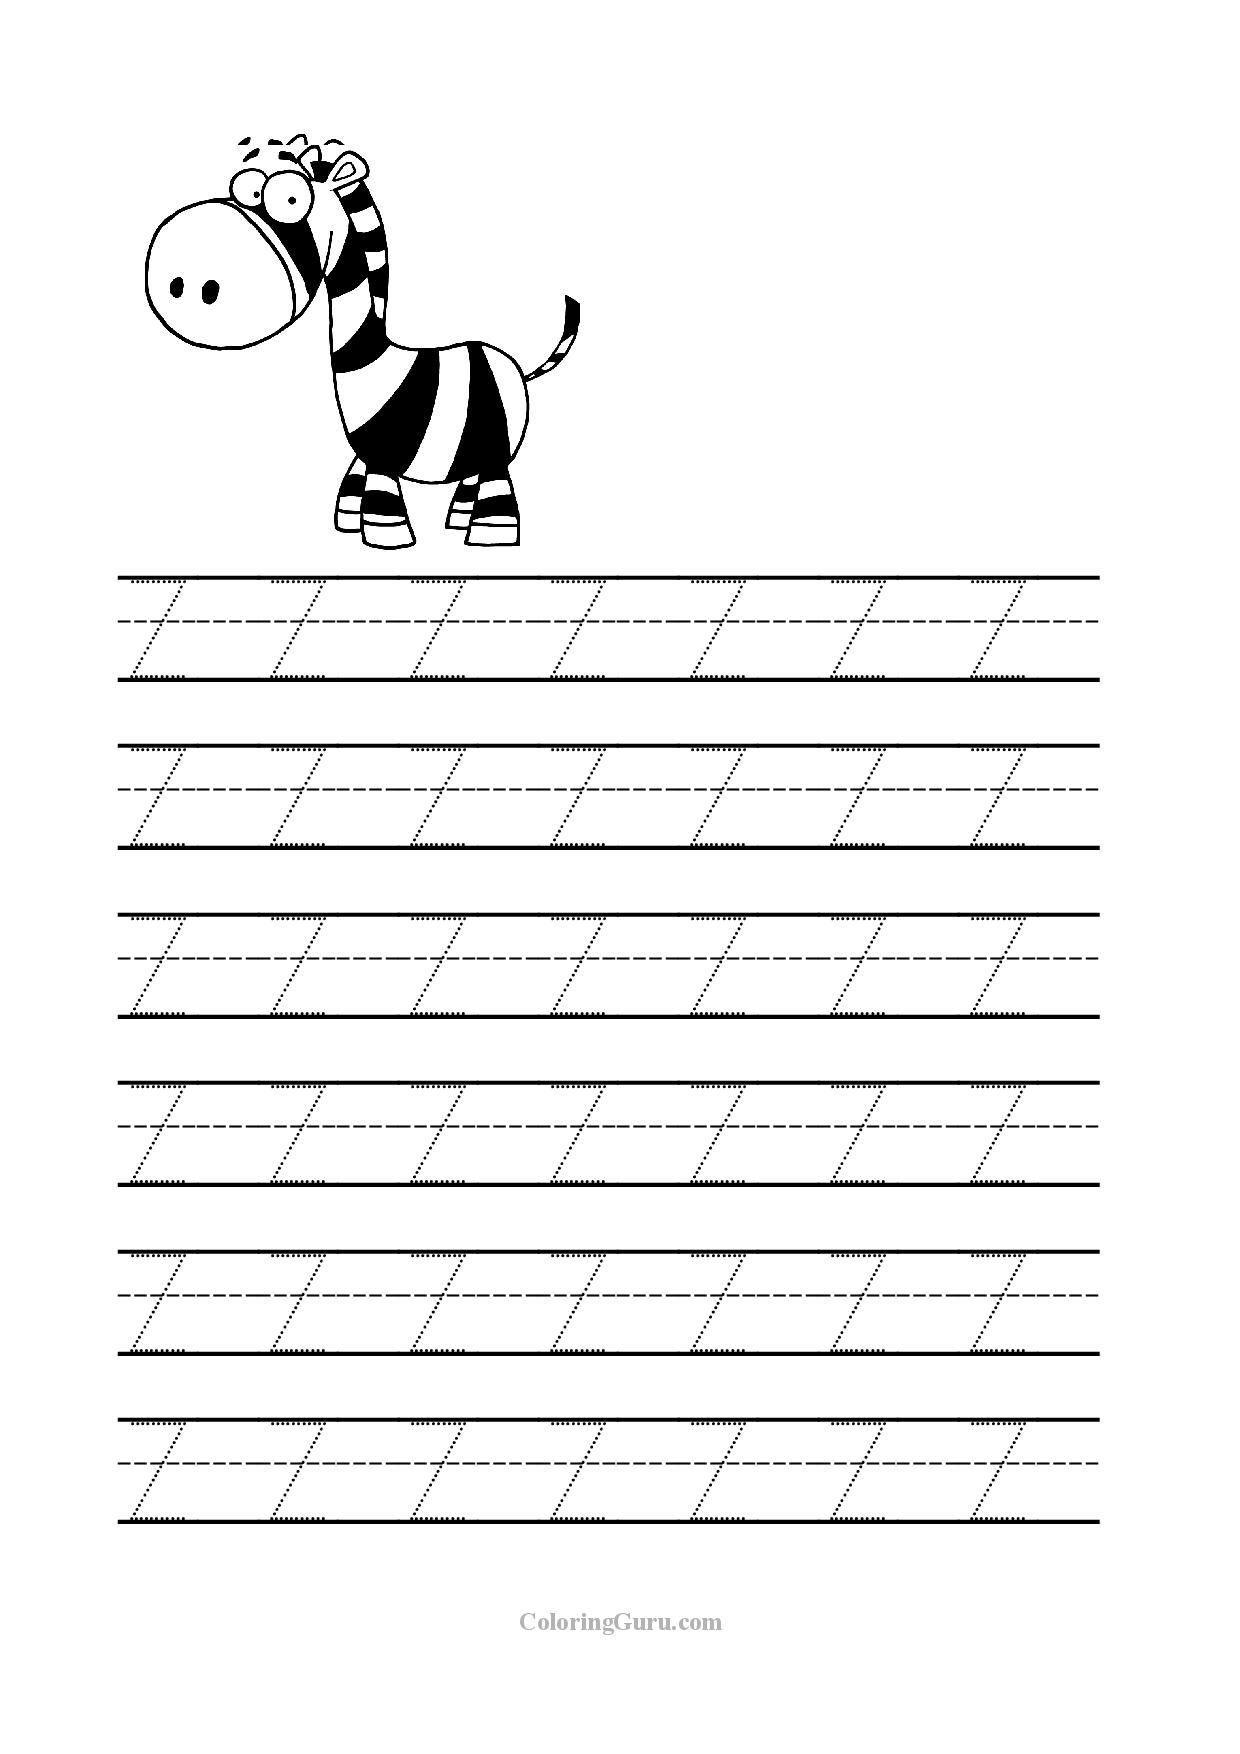 Free Printable Tracing Letter Z Worksheets For Preschool regarding Tracing Letter Z Preschool